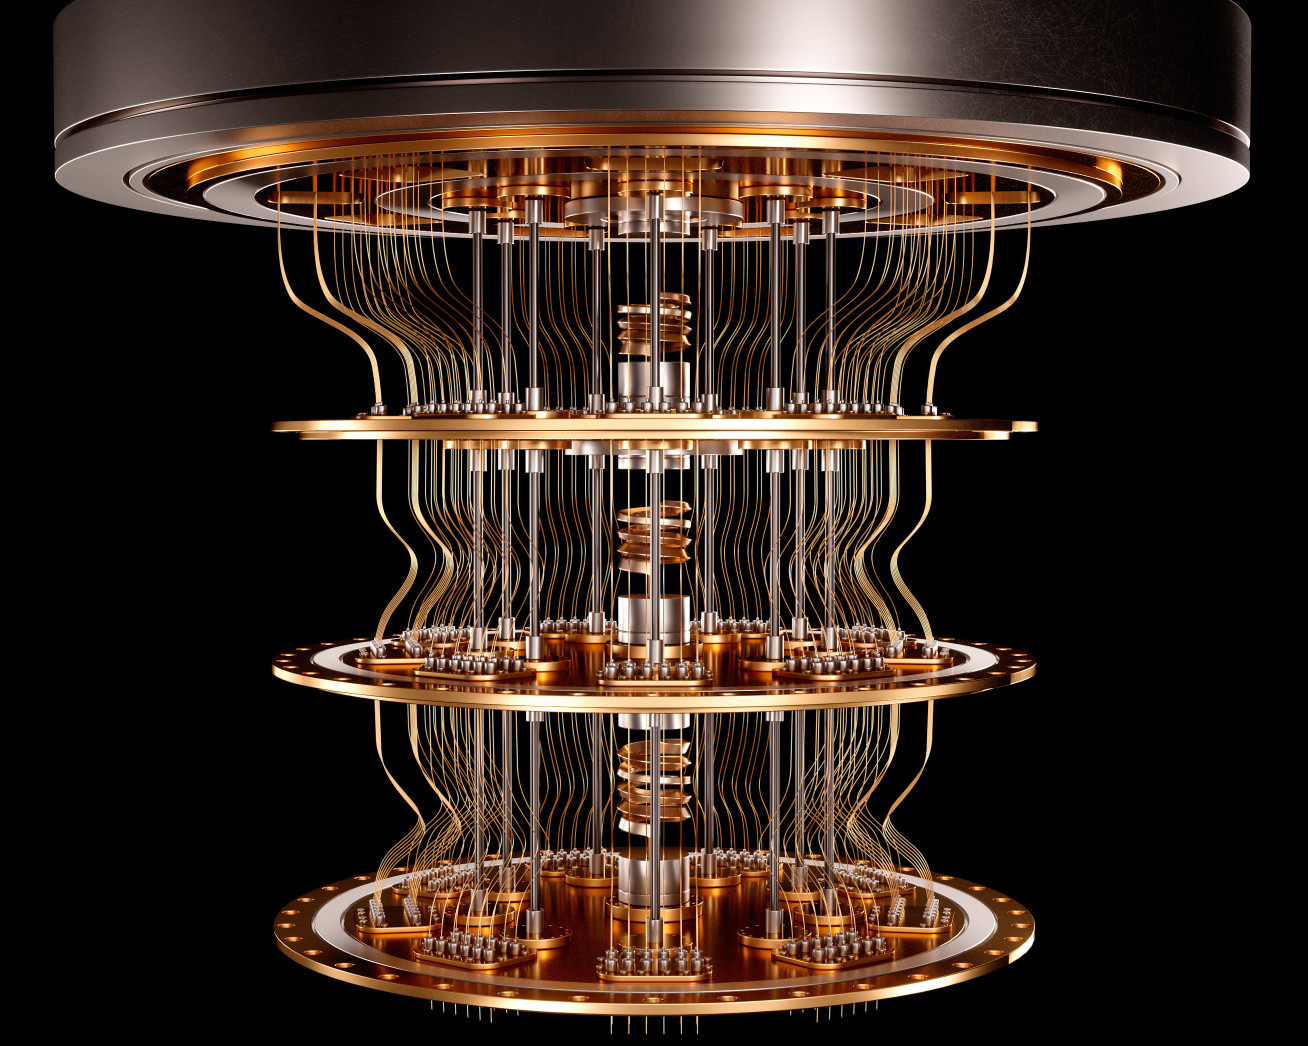 An image of a quantum computer on a black background.